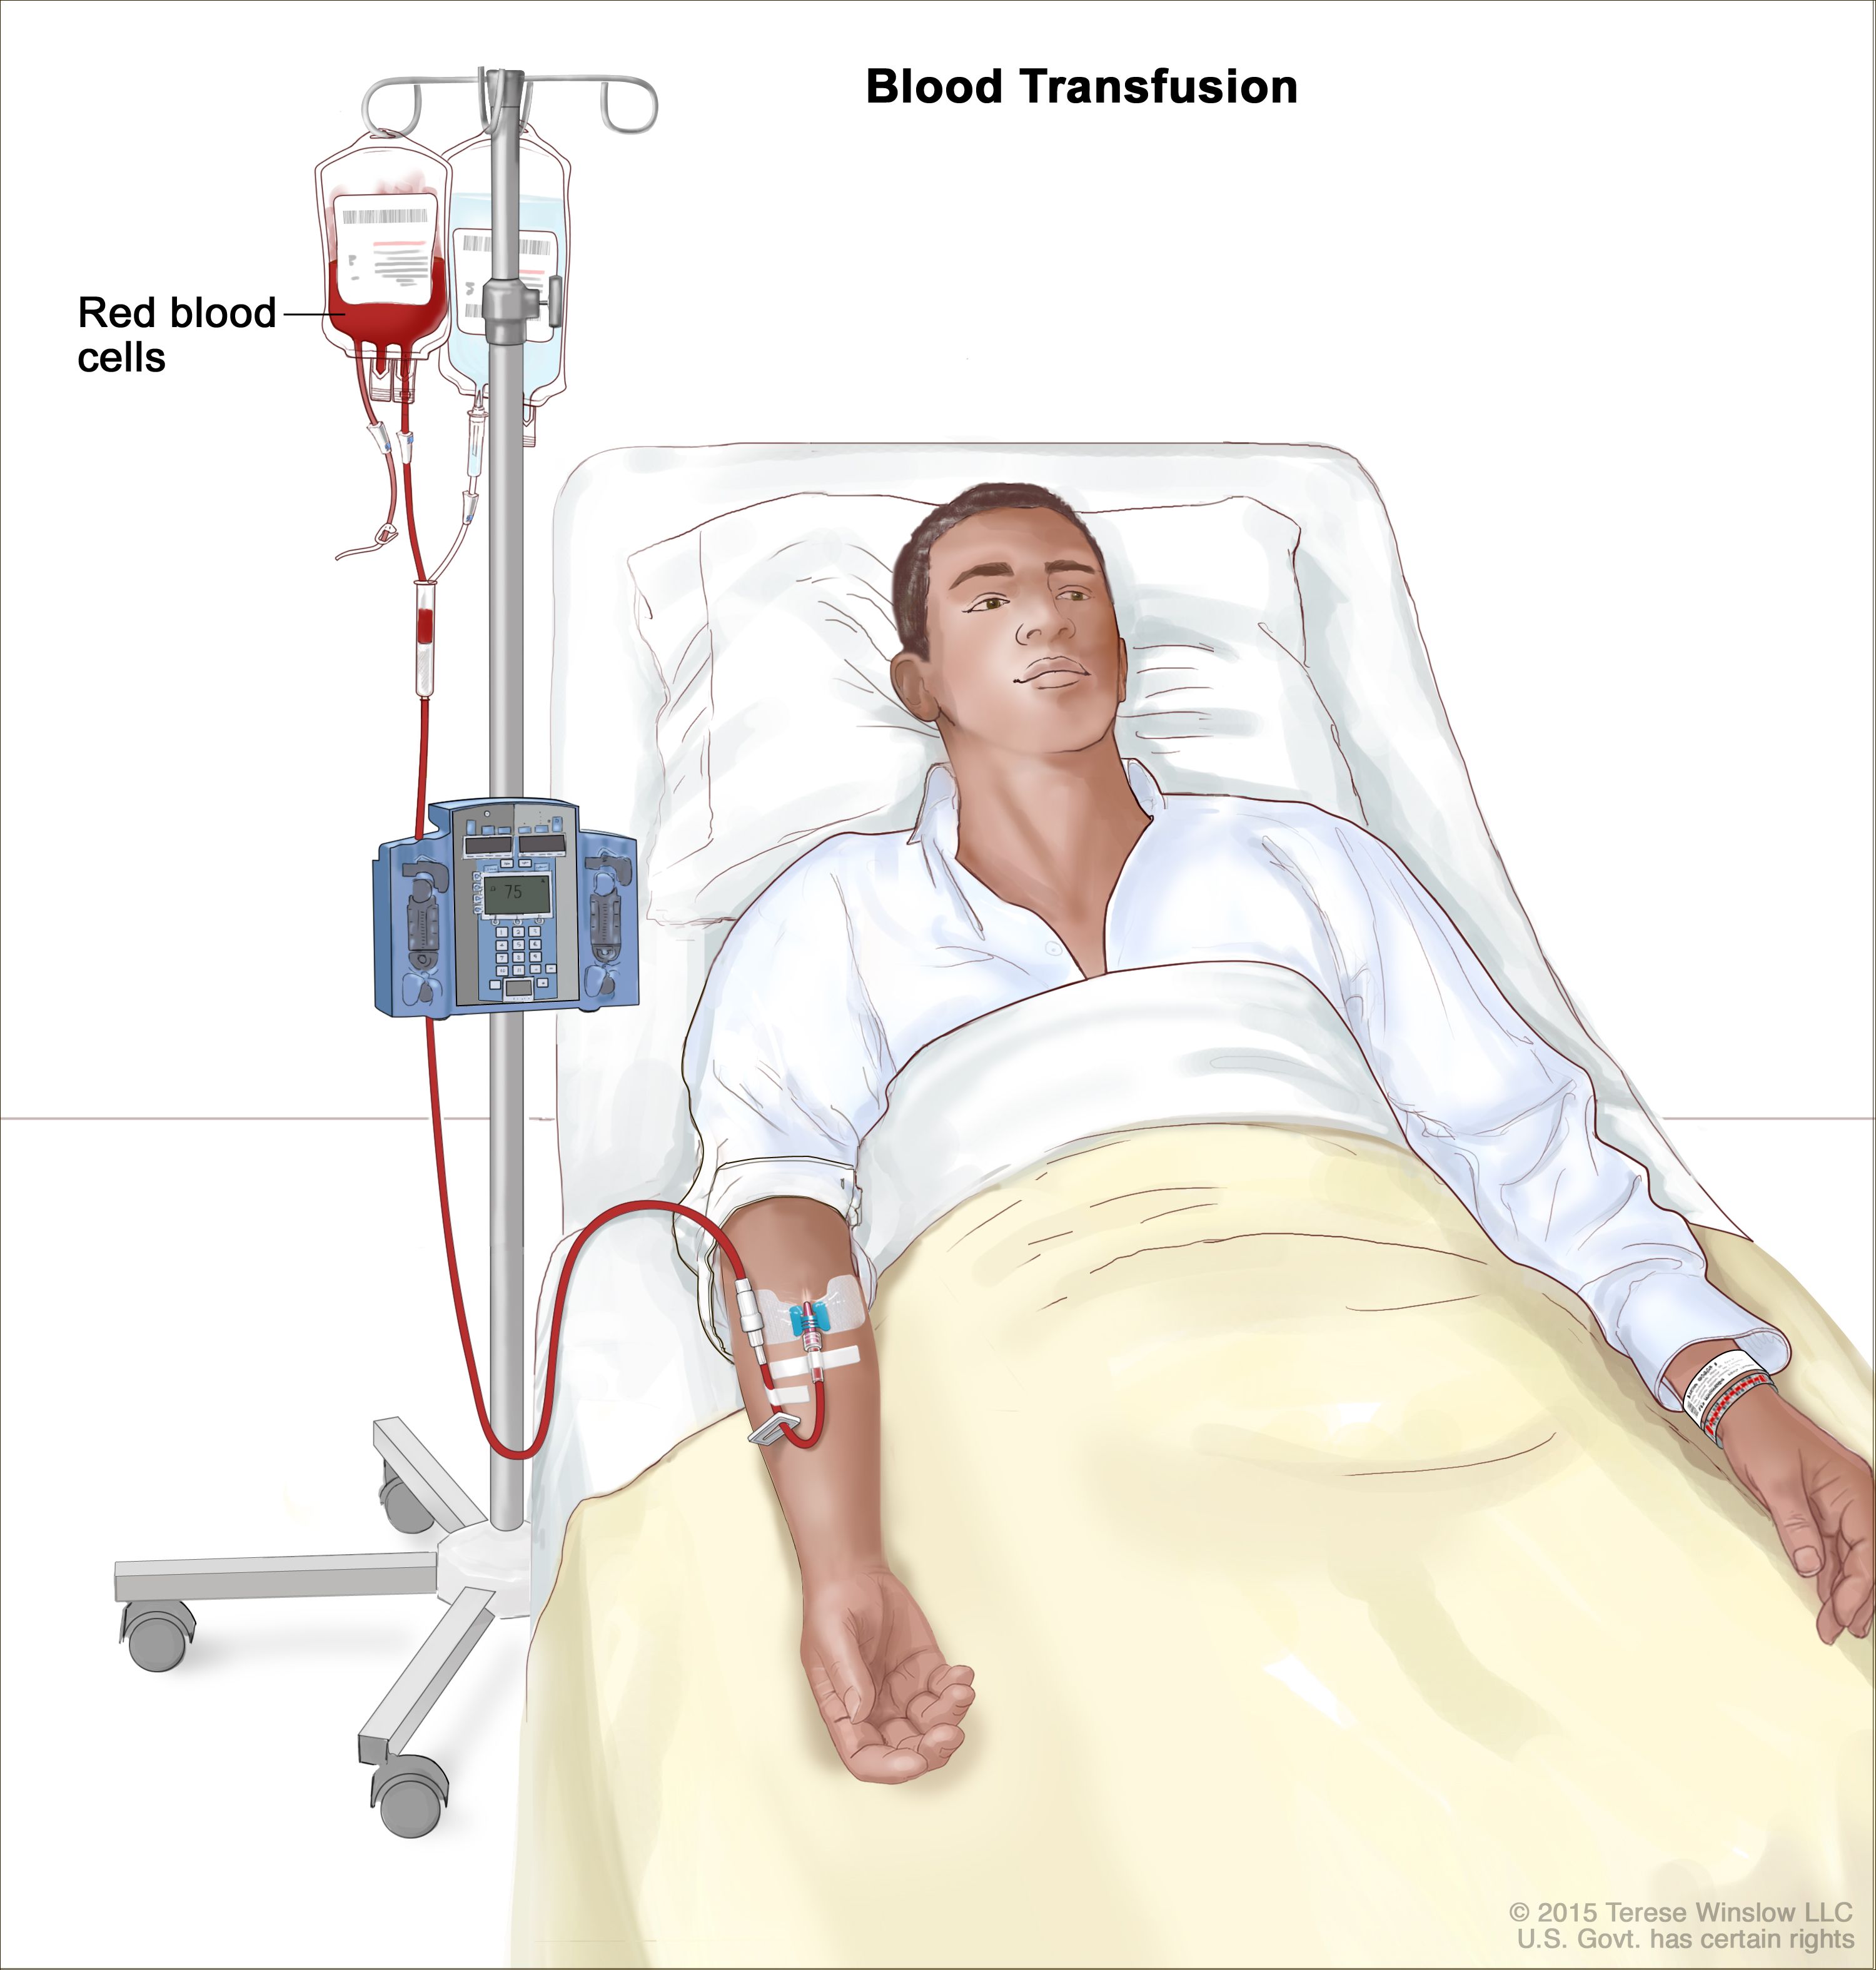 Pre-operative anemia can increase the risk of requiring a blood transfusion